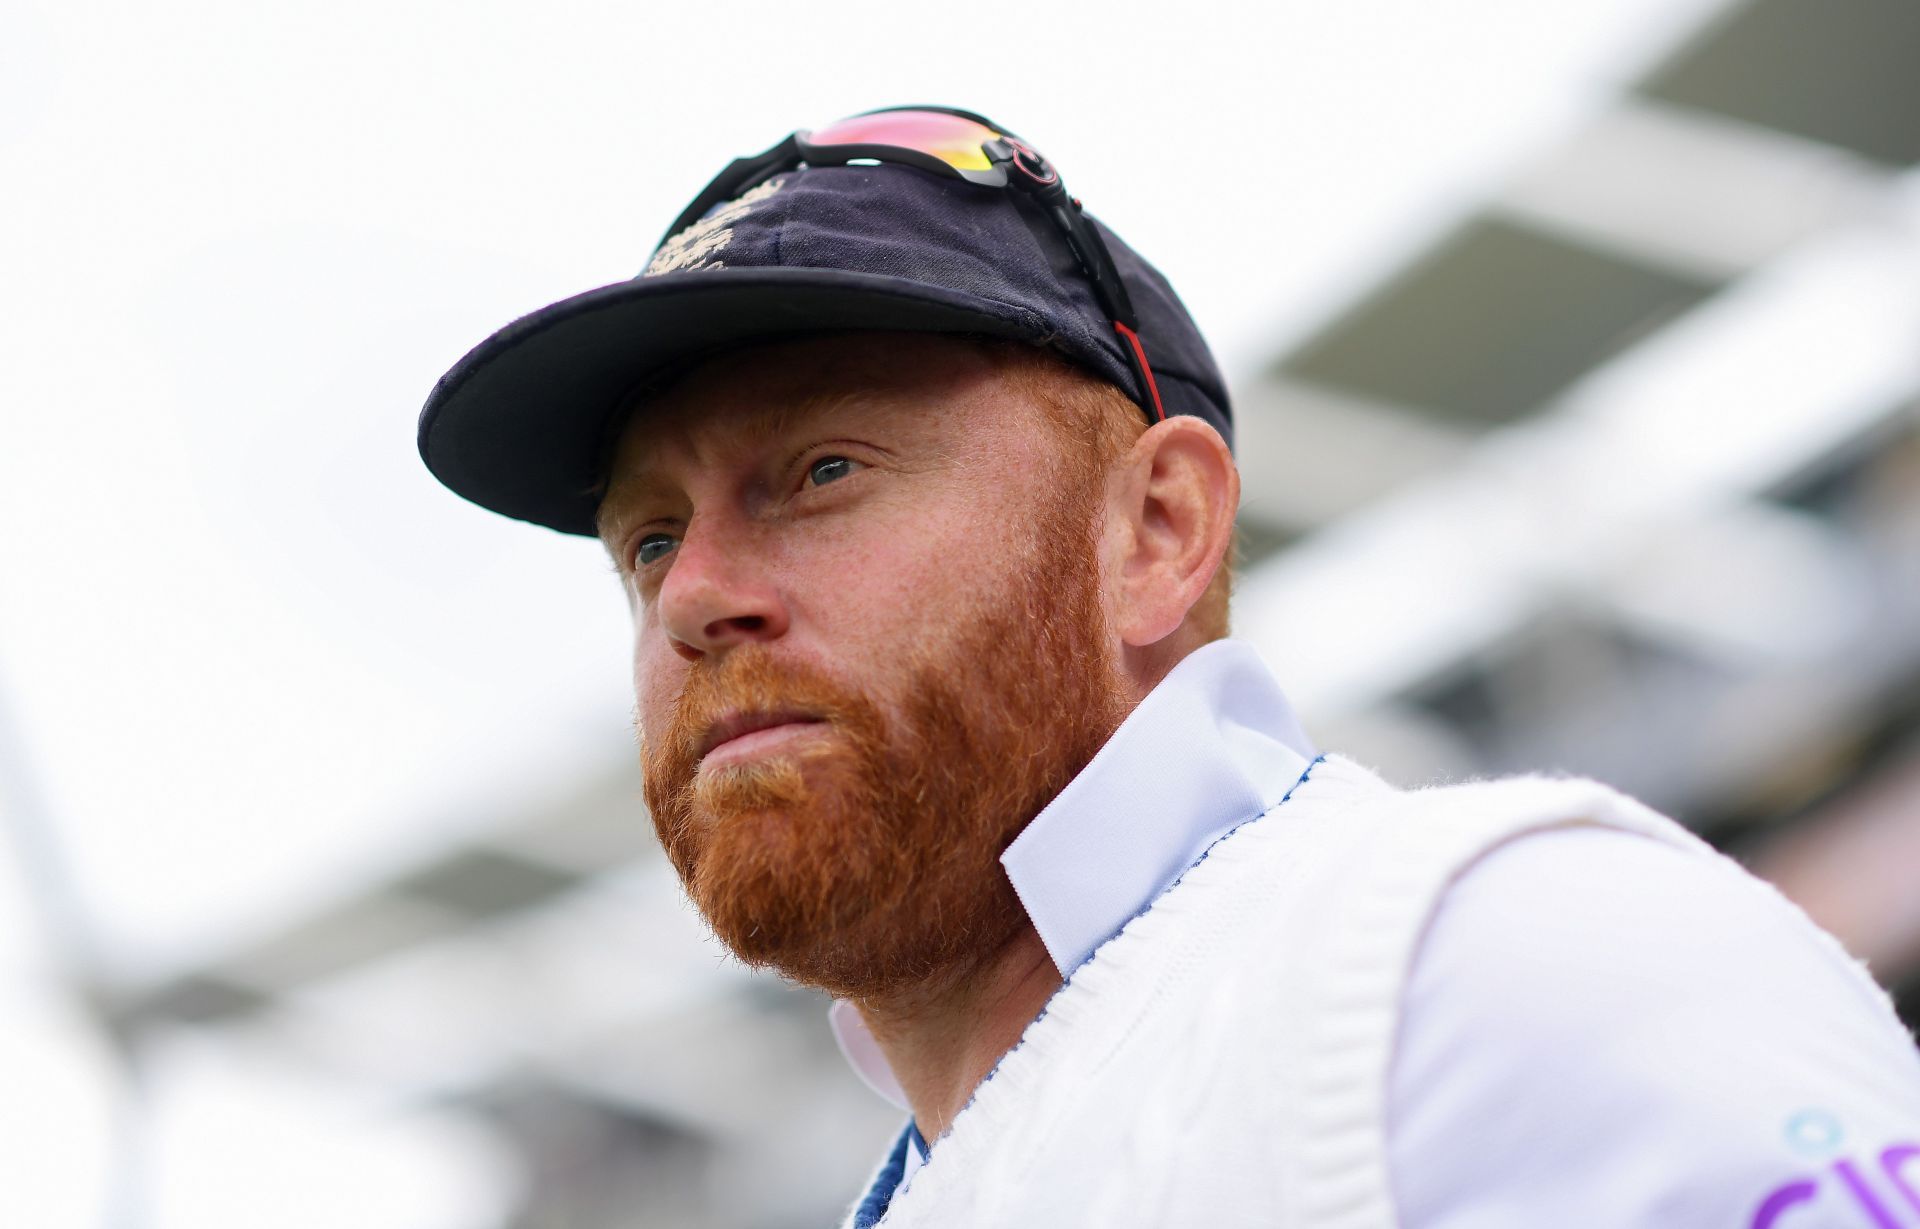 Jonny Bairstow will miss The Hundred 2022. (Image Credits: Getty)